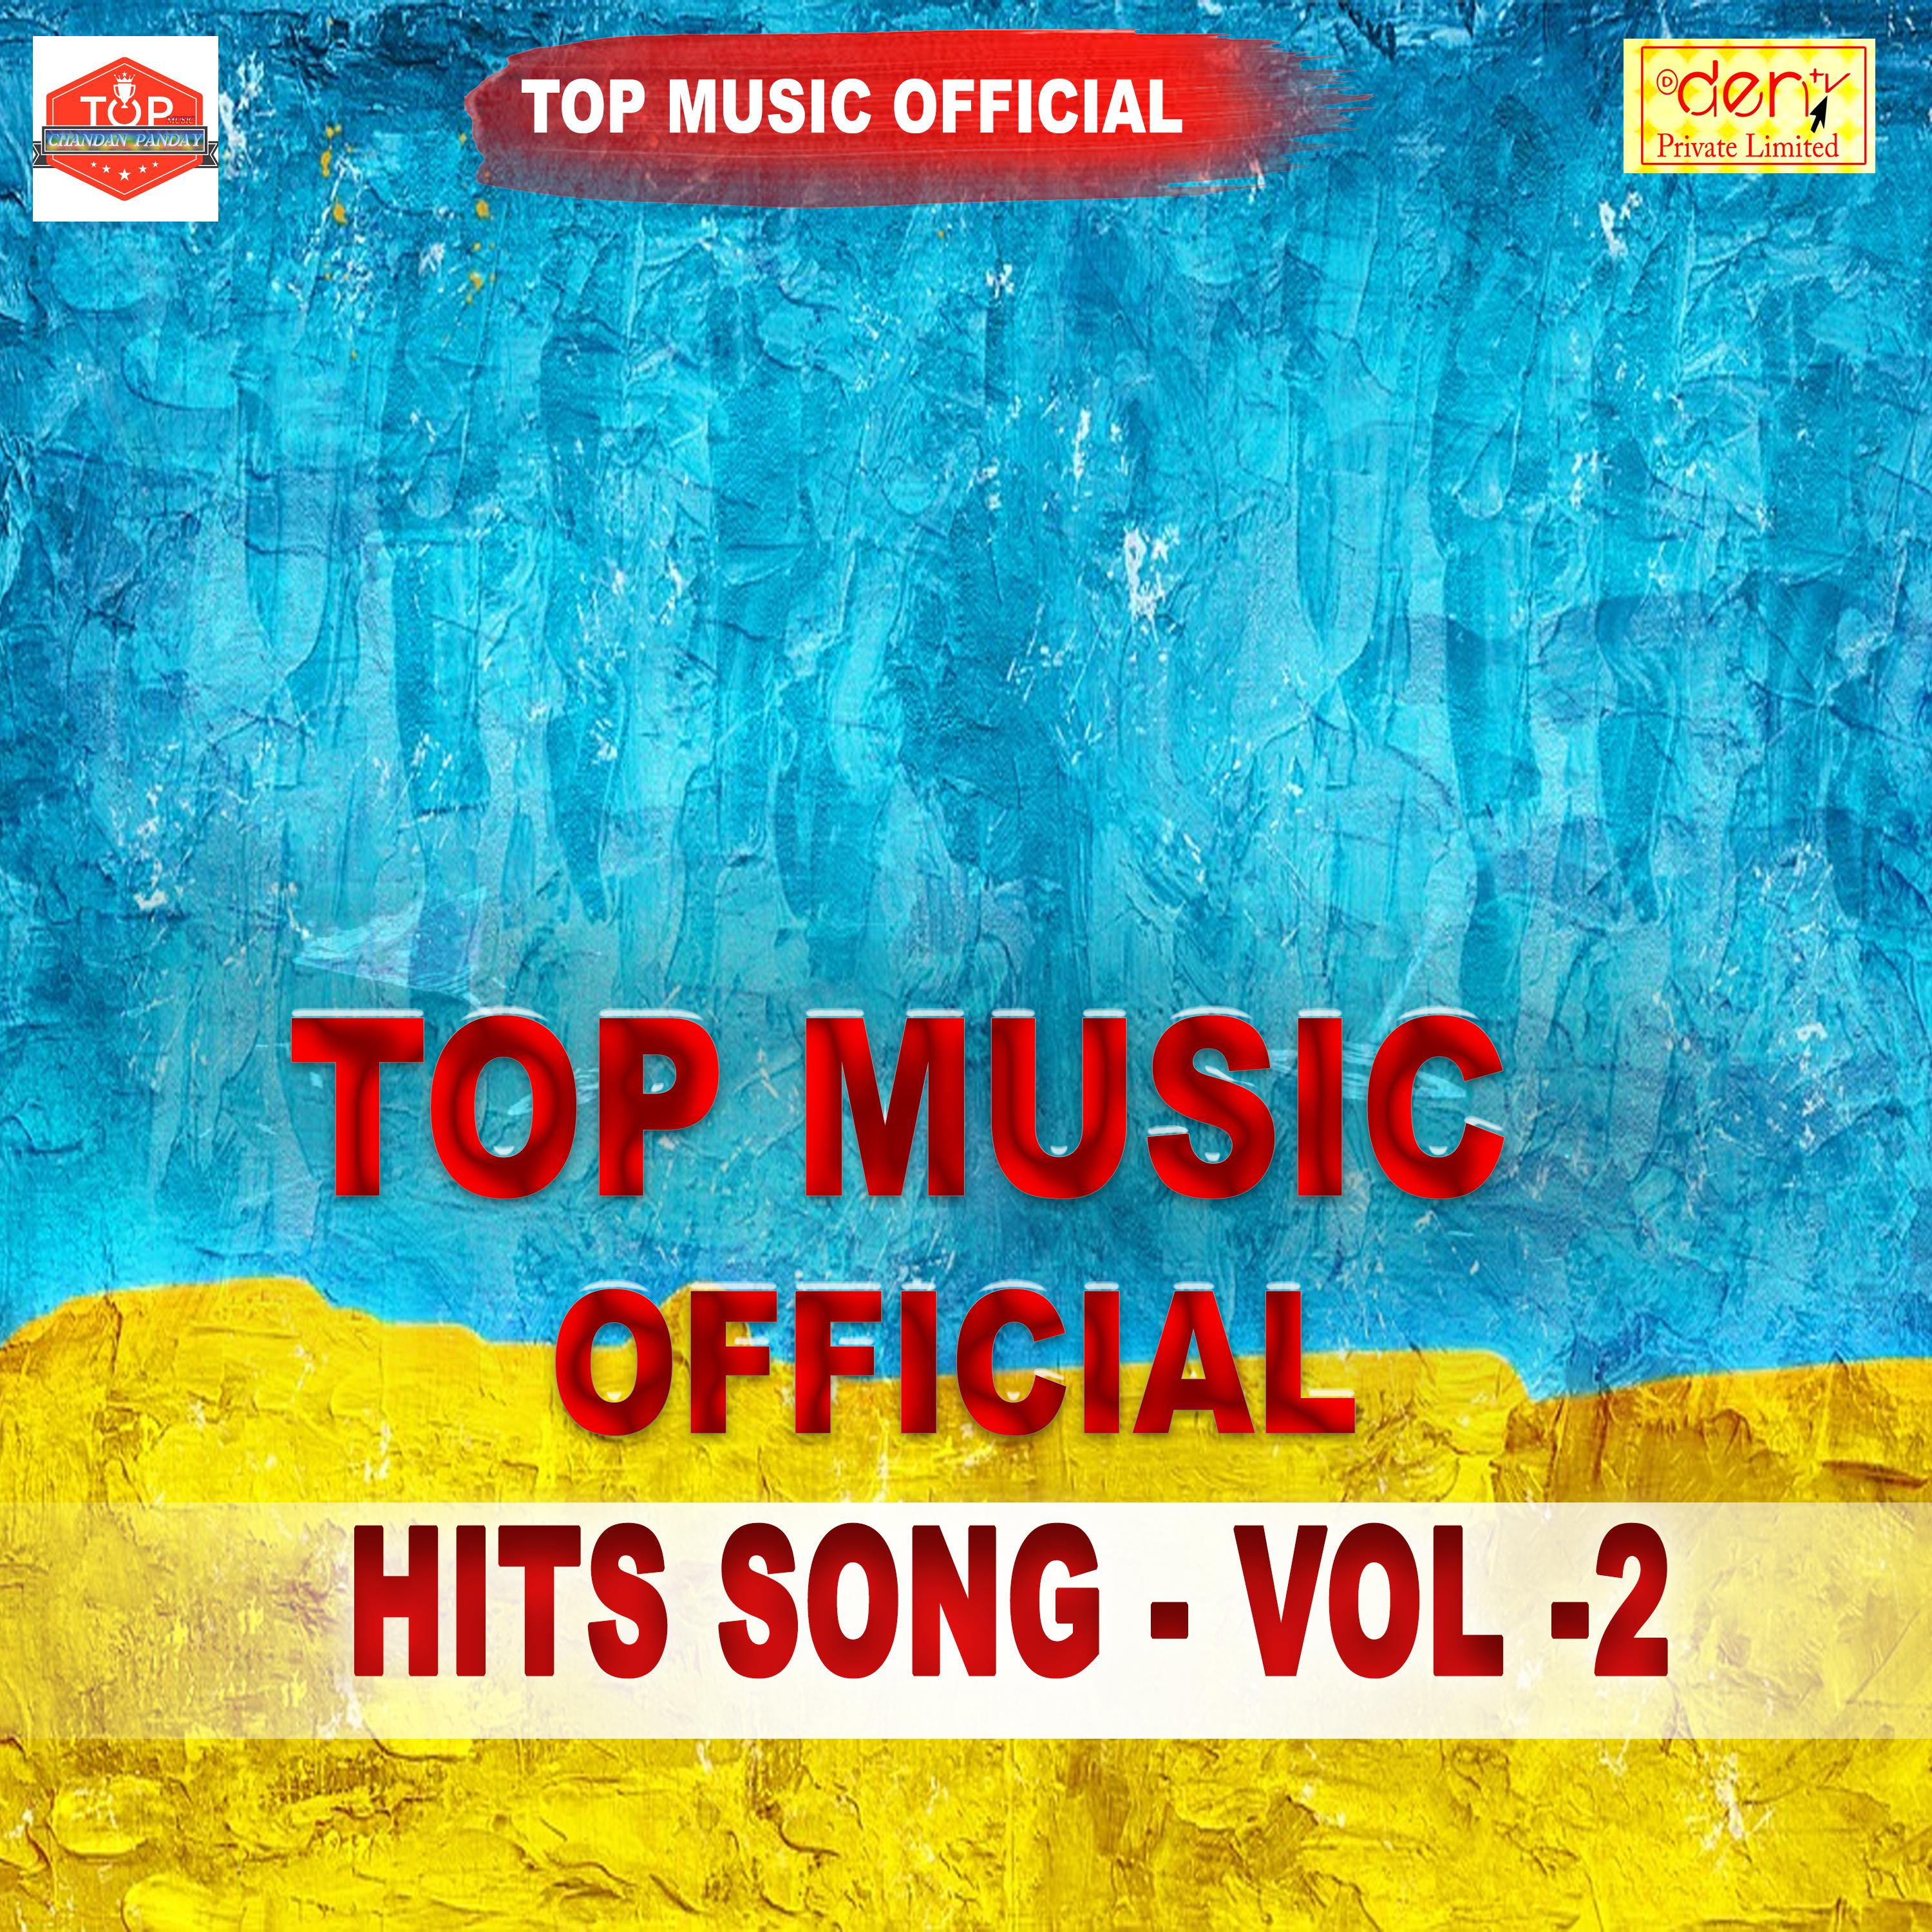 TOP MUSIC OFFICIAL Hits Vol - 2